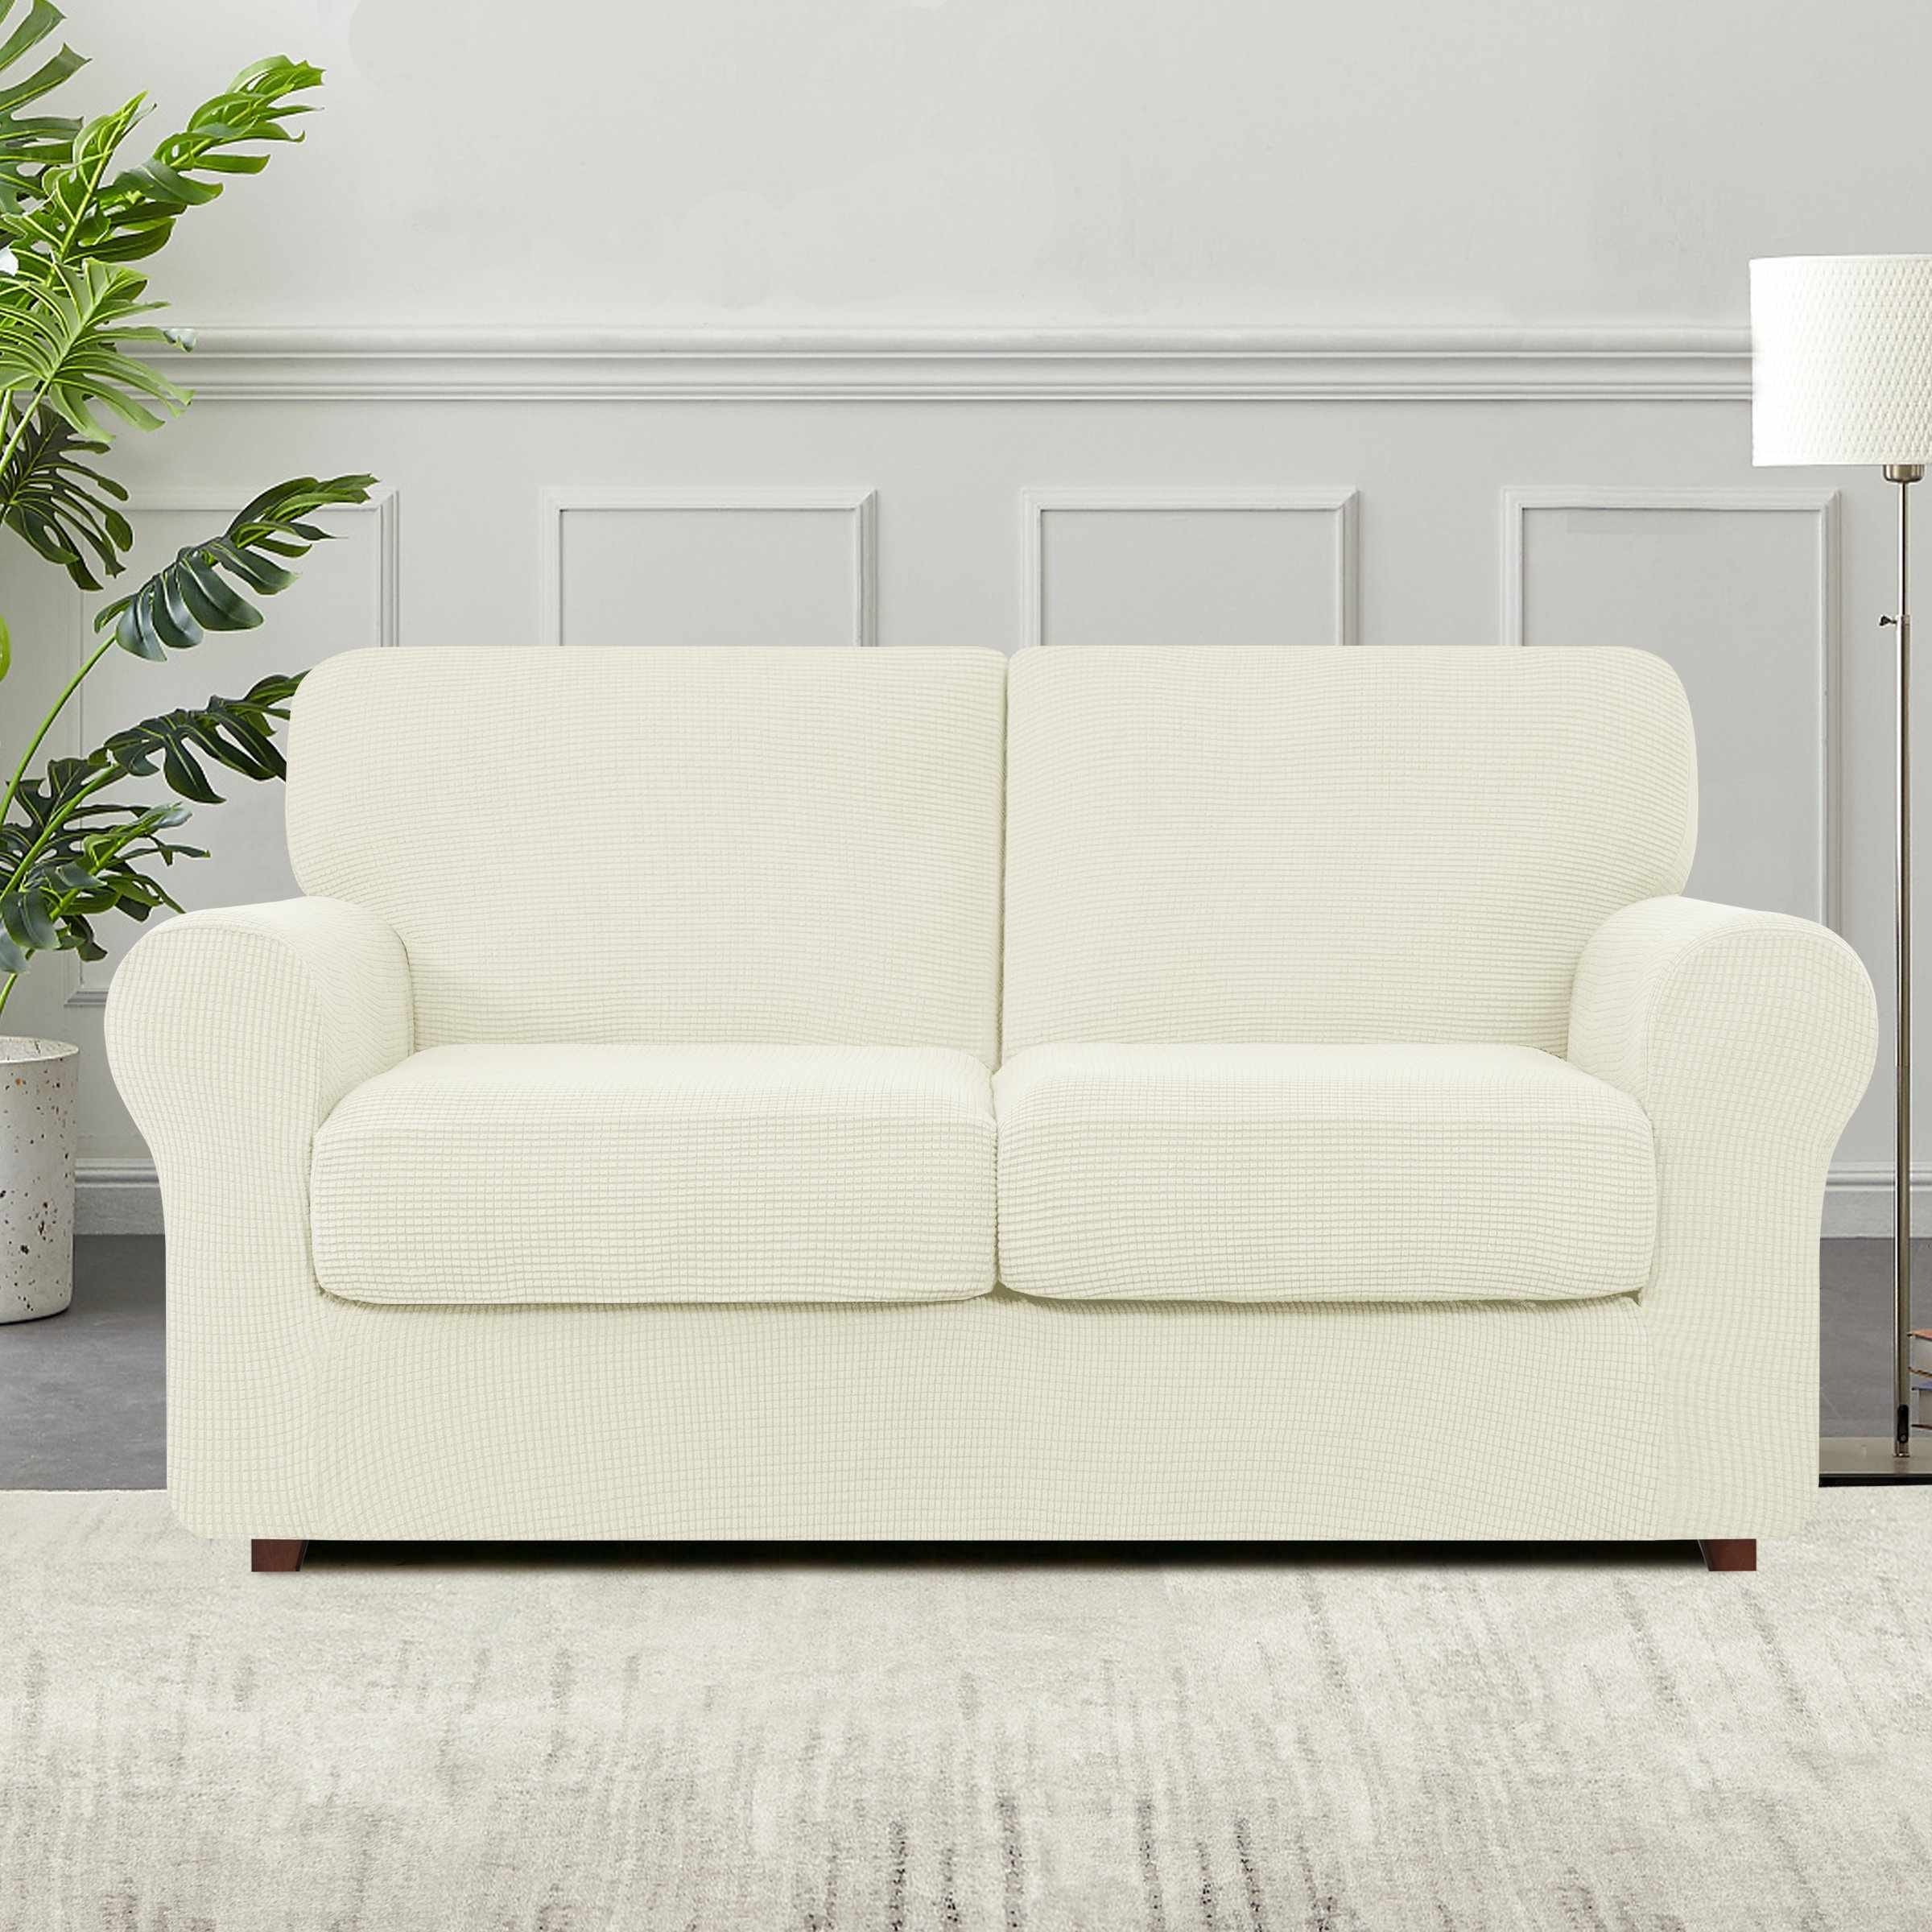 https://ak1.ostkcdn.com/images/products/is/images/direct/bc3980357f7595de8145898b75d369b919436b67/Subrtex-9-Piece-Stretch-Sofa-Slipcover-Sets-with-4-Backrest-Cushion-Covers-and-4-Seat-Cushion-Covers.jpg